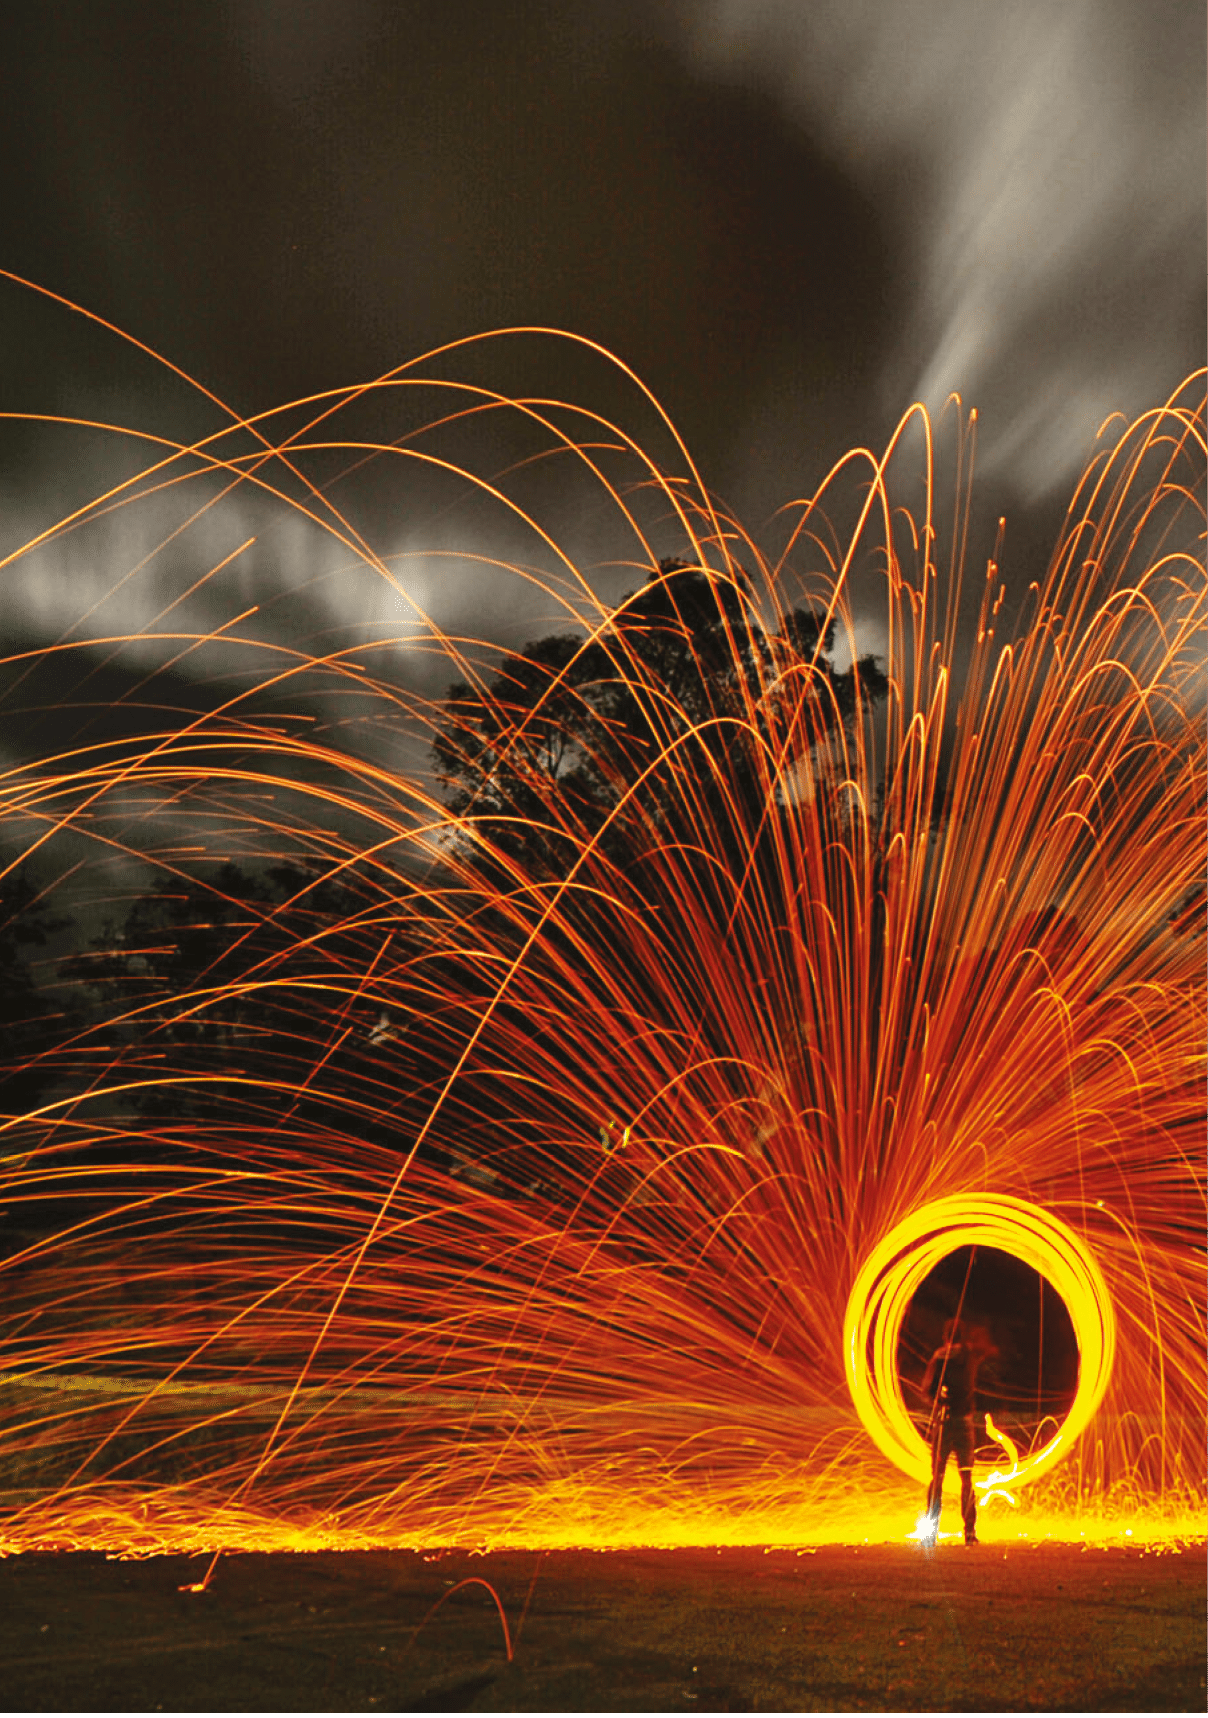 Using burning steel wool combined with a moon-filled night to create this amazing effect over a long exposure  